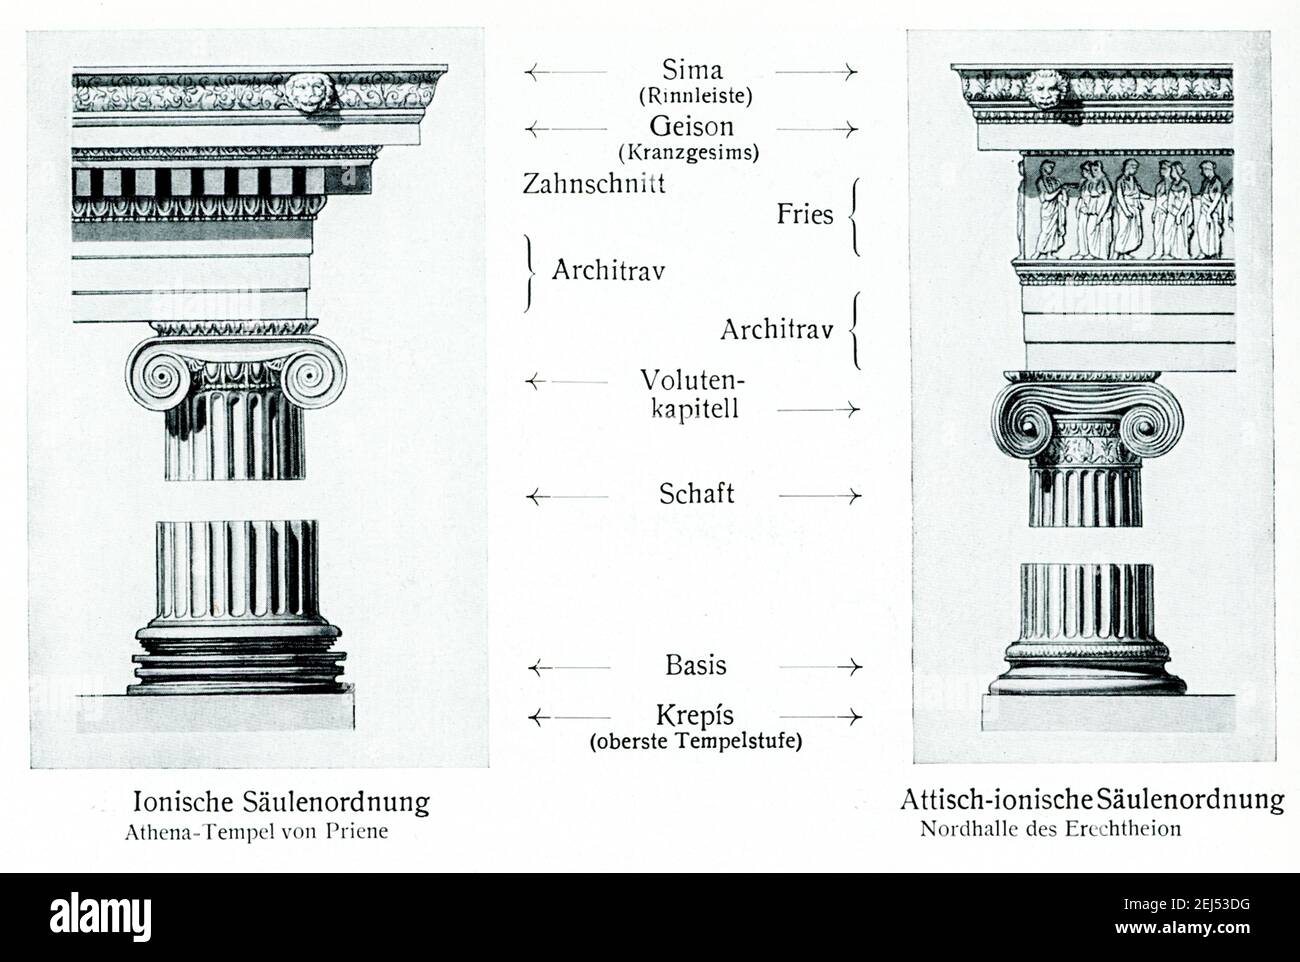 This illustration shows Ionic Order Column used in building the Temple of Athena at Priene  (left) and the Attic Ionic Order Column used in building the North side of the Erechtheion (right. The labels are in German. The Temple of Athena Polias in Priene was an Ionic Order temple located northwest of Priene's Agora, inside a complex of the sanctuary. Built around 350 BC, it was dedicated to Athena Polias, the same as the patron deity of Athens. The Erechtheion (or Erechtheum) is an ancient Greek temple constructed on the acropolis of Athens between 421 and 406 BC in the Golden Age of the city Stock Photo